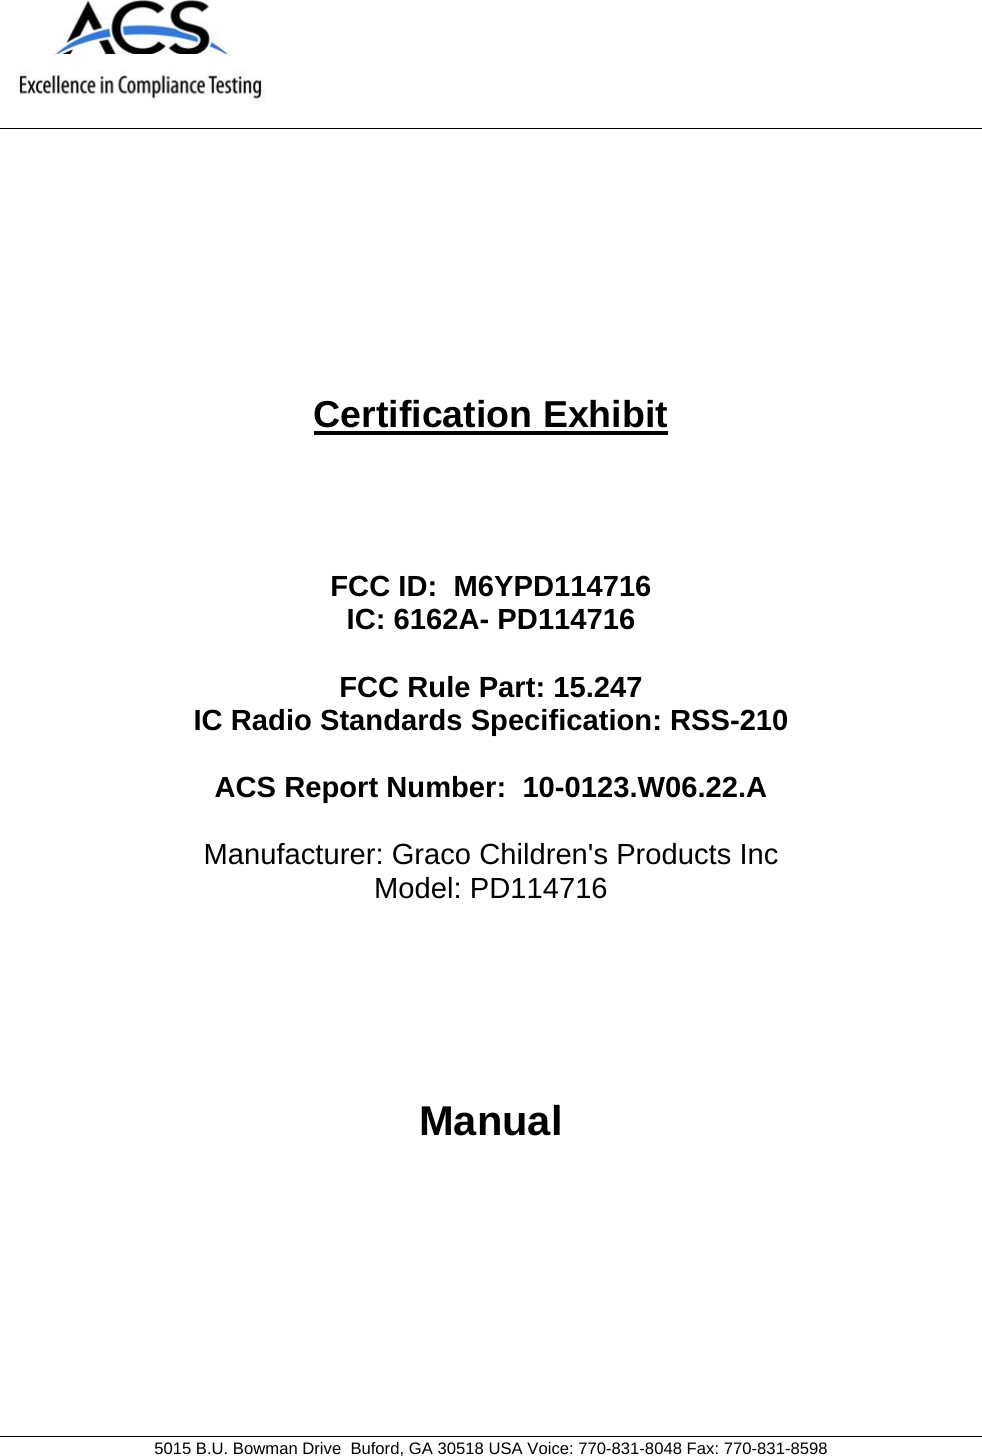     5015 B.U. Bowman Drive  Buford, GA 30518 USA Voice: 770-831-8048 Fax: 770-831-8598   Certification Exhibit     FCC ID:  M6YPD114716 IC: 6162A- PD114716  FCC Rule Part: 15.247 IC Radio Standards Specification: RSS-210  ACS Report Number:  10-0123.W06.22.A   Manufacturer: Graco Children&apos;s Products Inc Model: PD114716     Manual  